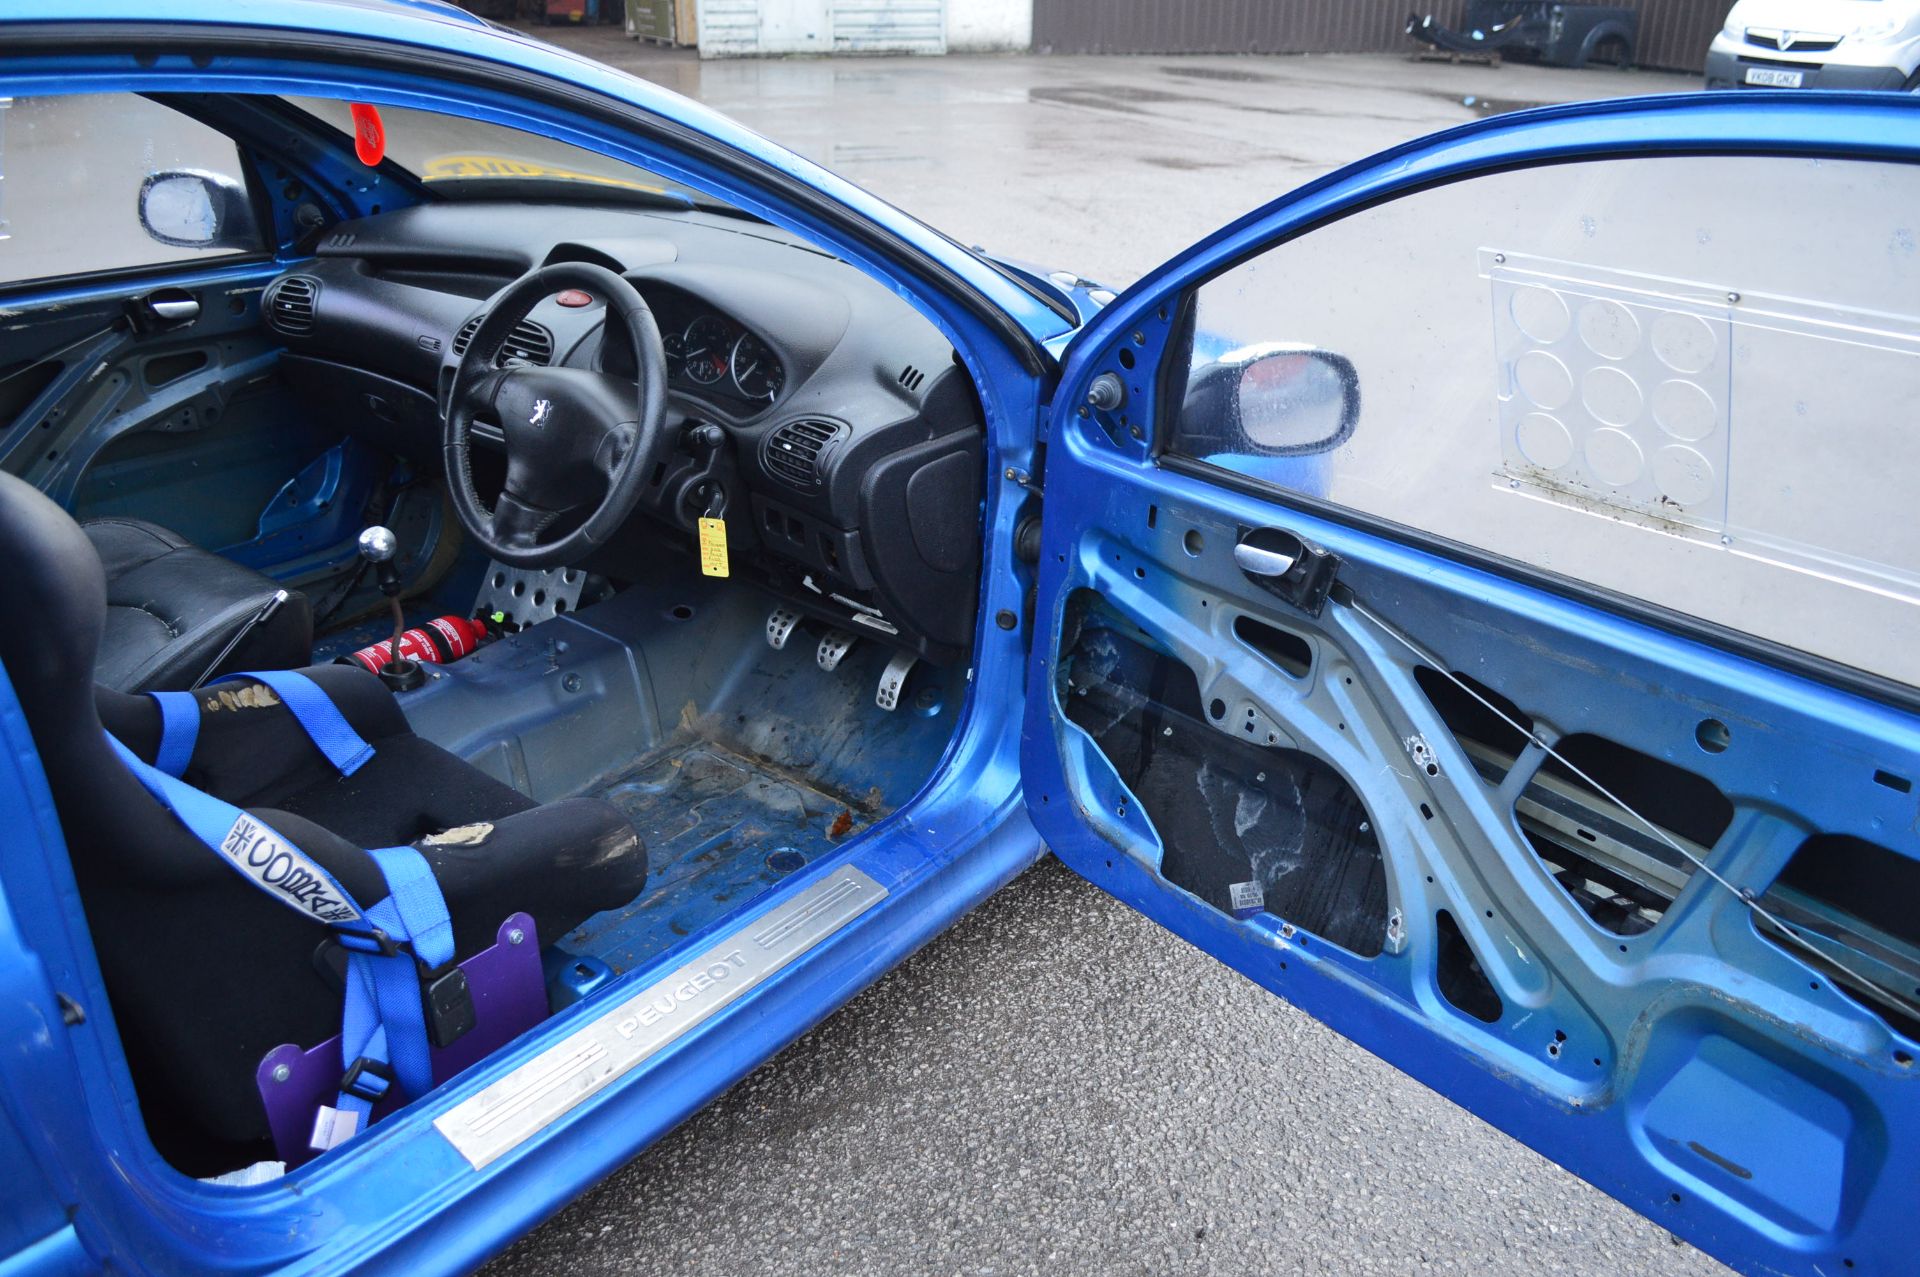 2003/03 REG PEUGEOT 206 GTI 180HP FAST TRACK DAY CAR  HAS THE 'VAN' PANELS FITTED INSTEAD OF REAR - Image 10 of 15